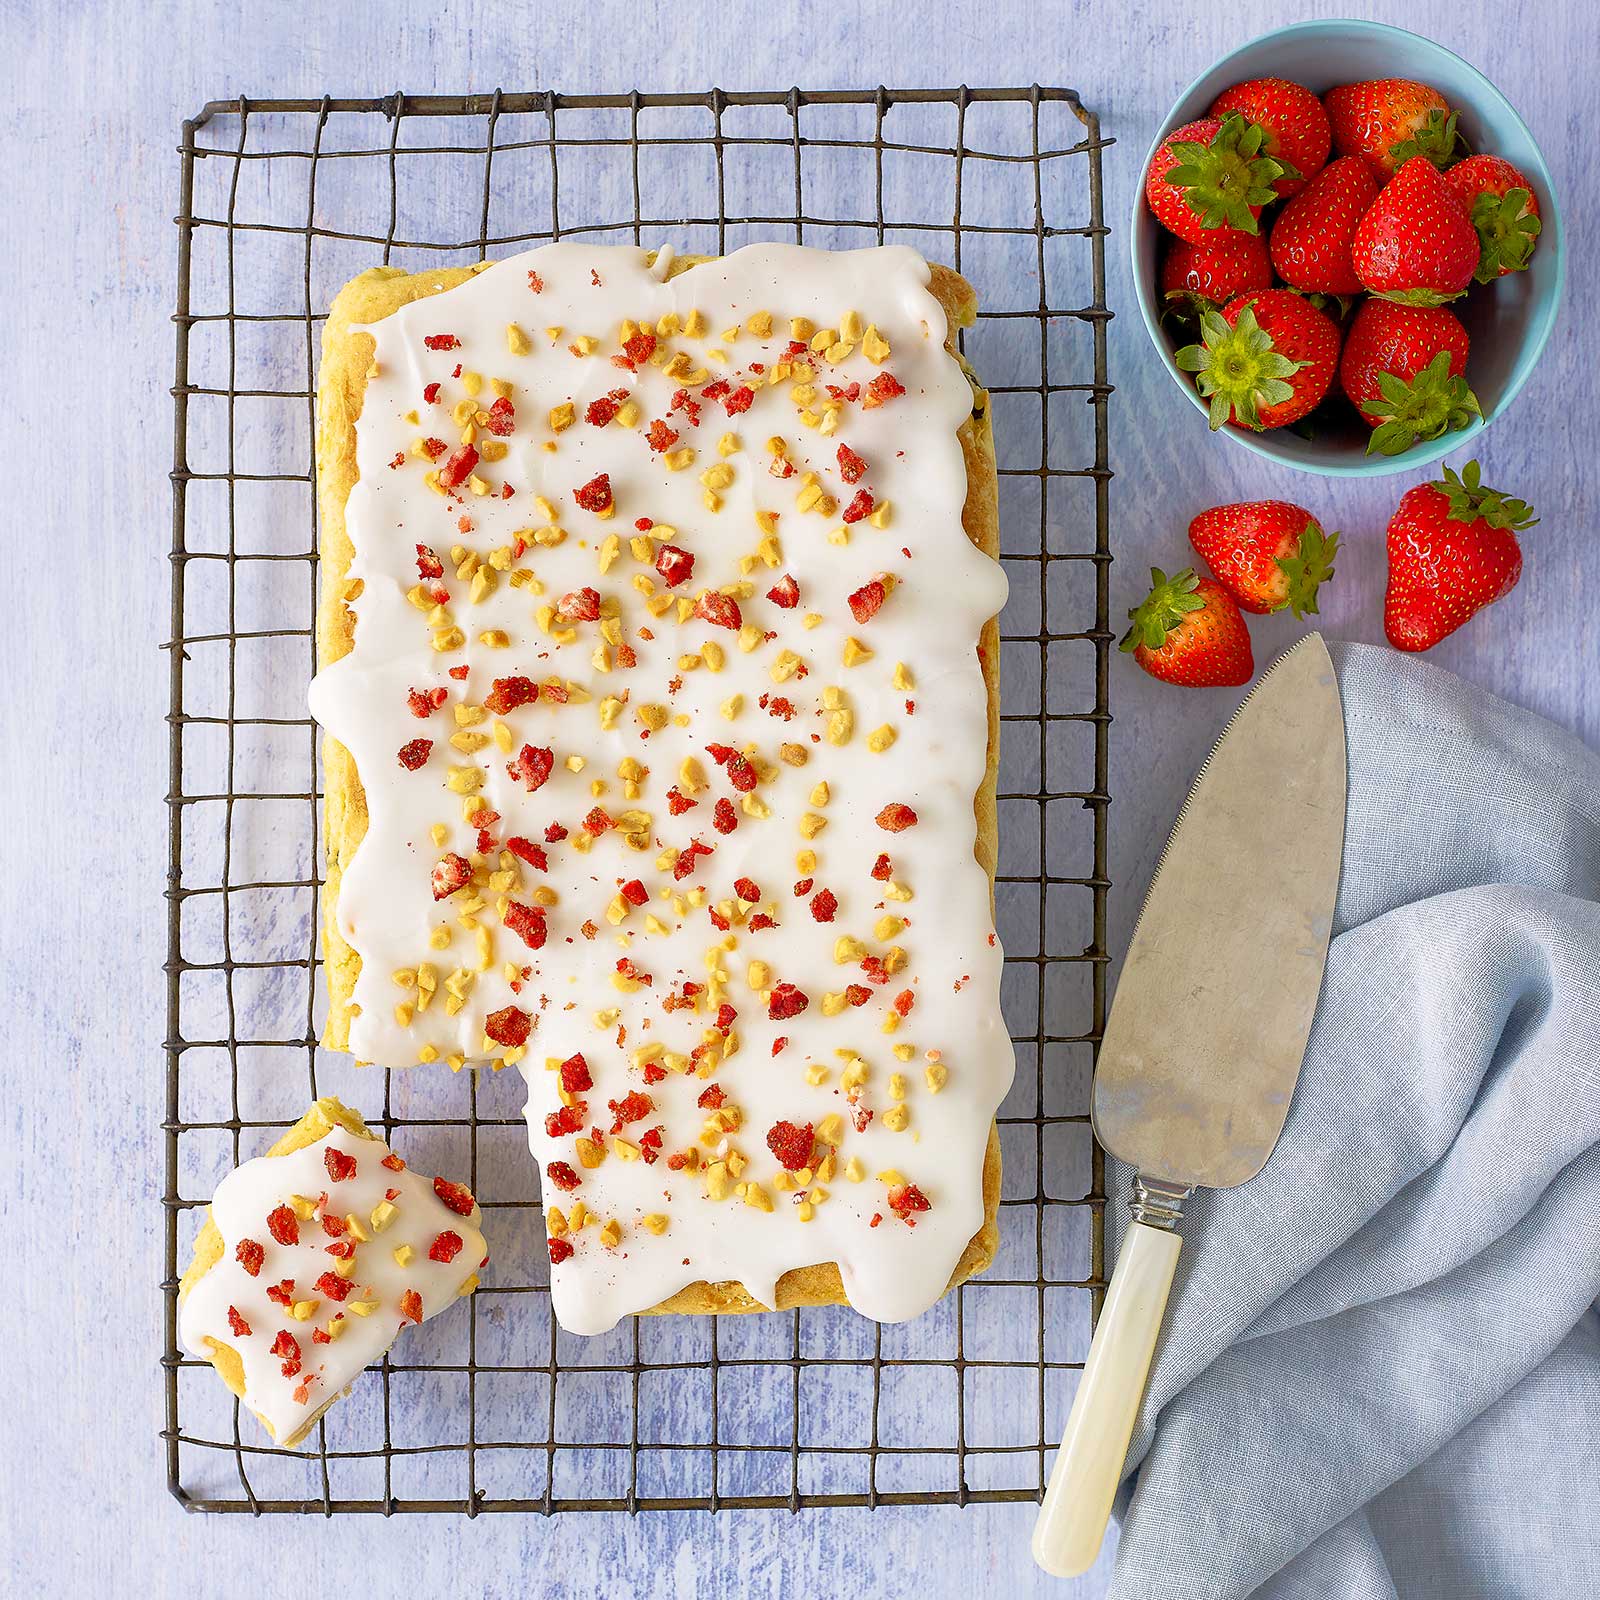 Dairy-free white chocolate brownie with white icing, crushed nuts and dried strawberries sits on a wire rack. A slice has been cut and is off to the side. Fresh strawberries are in a blue bowl at the back.